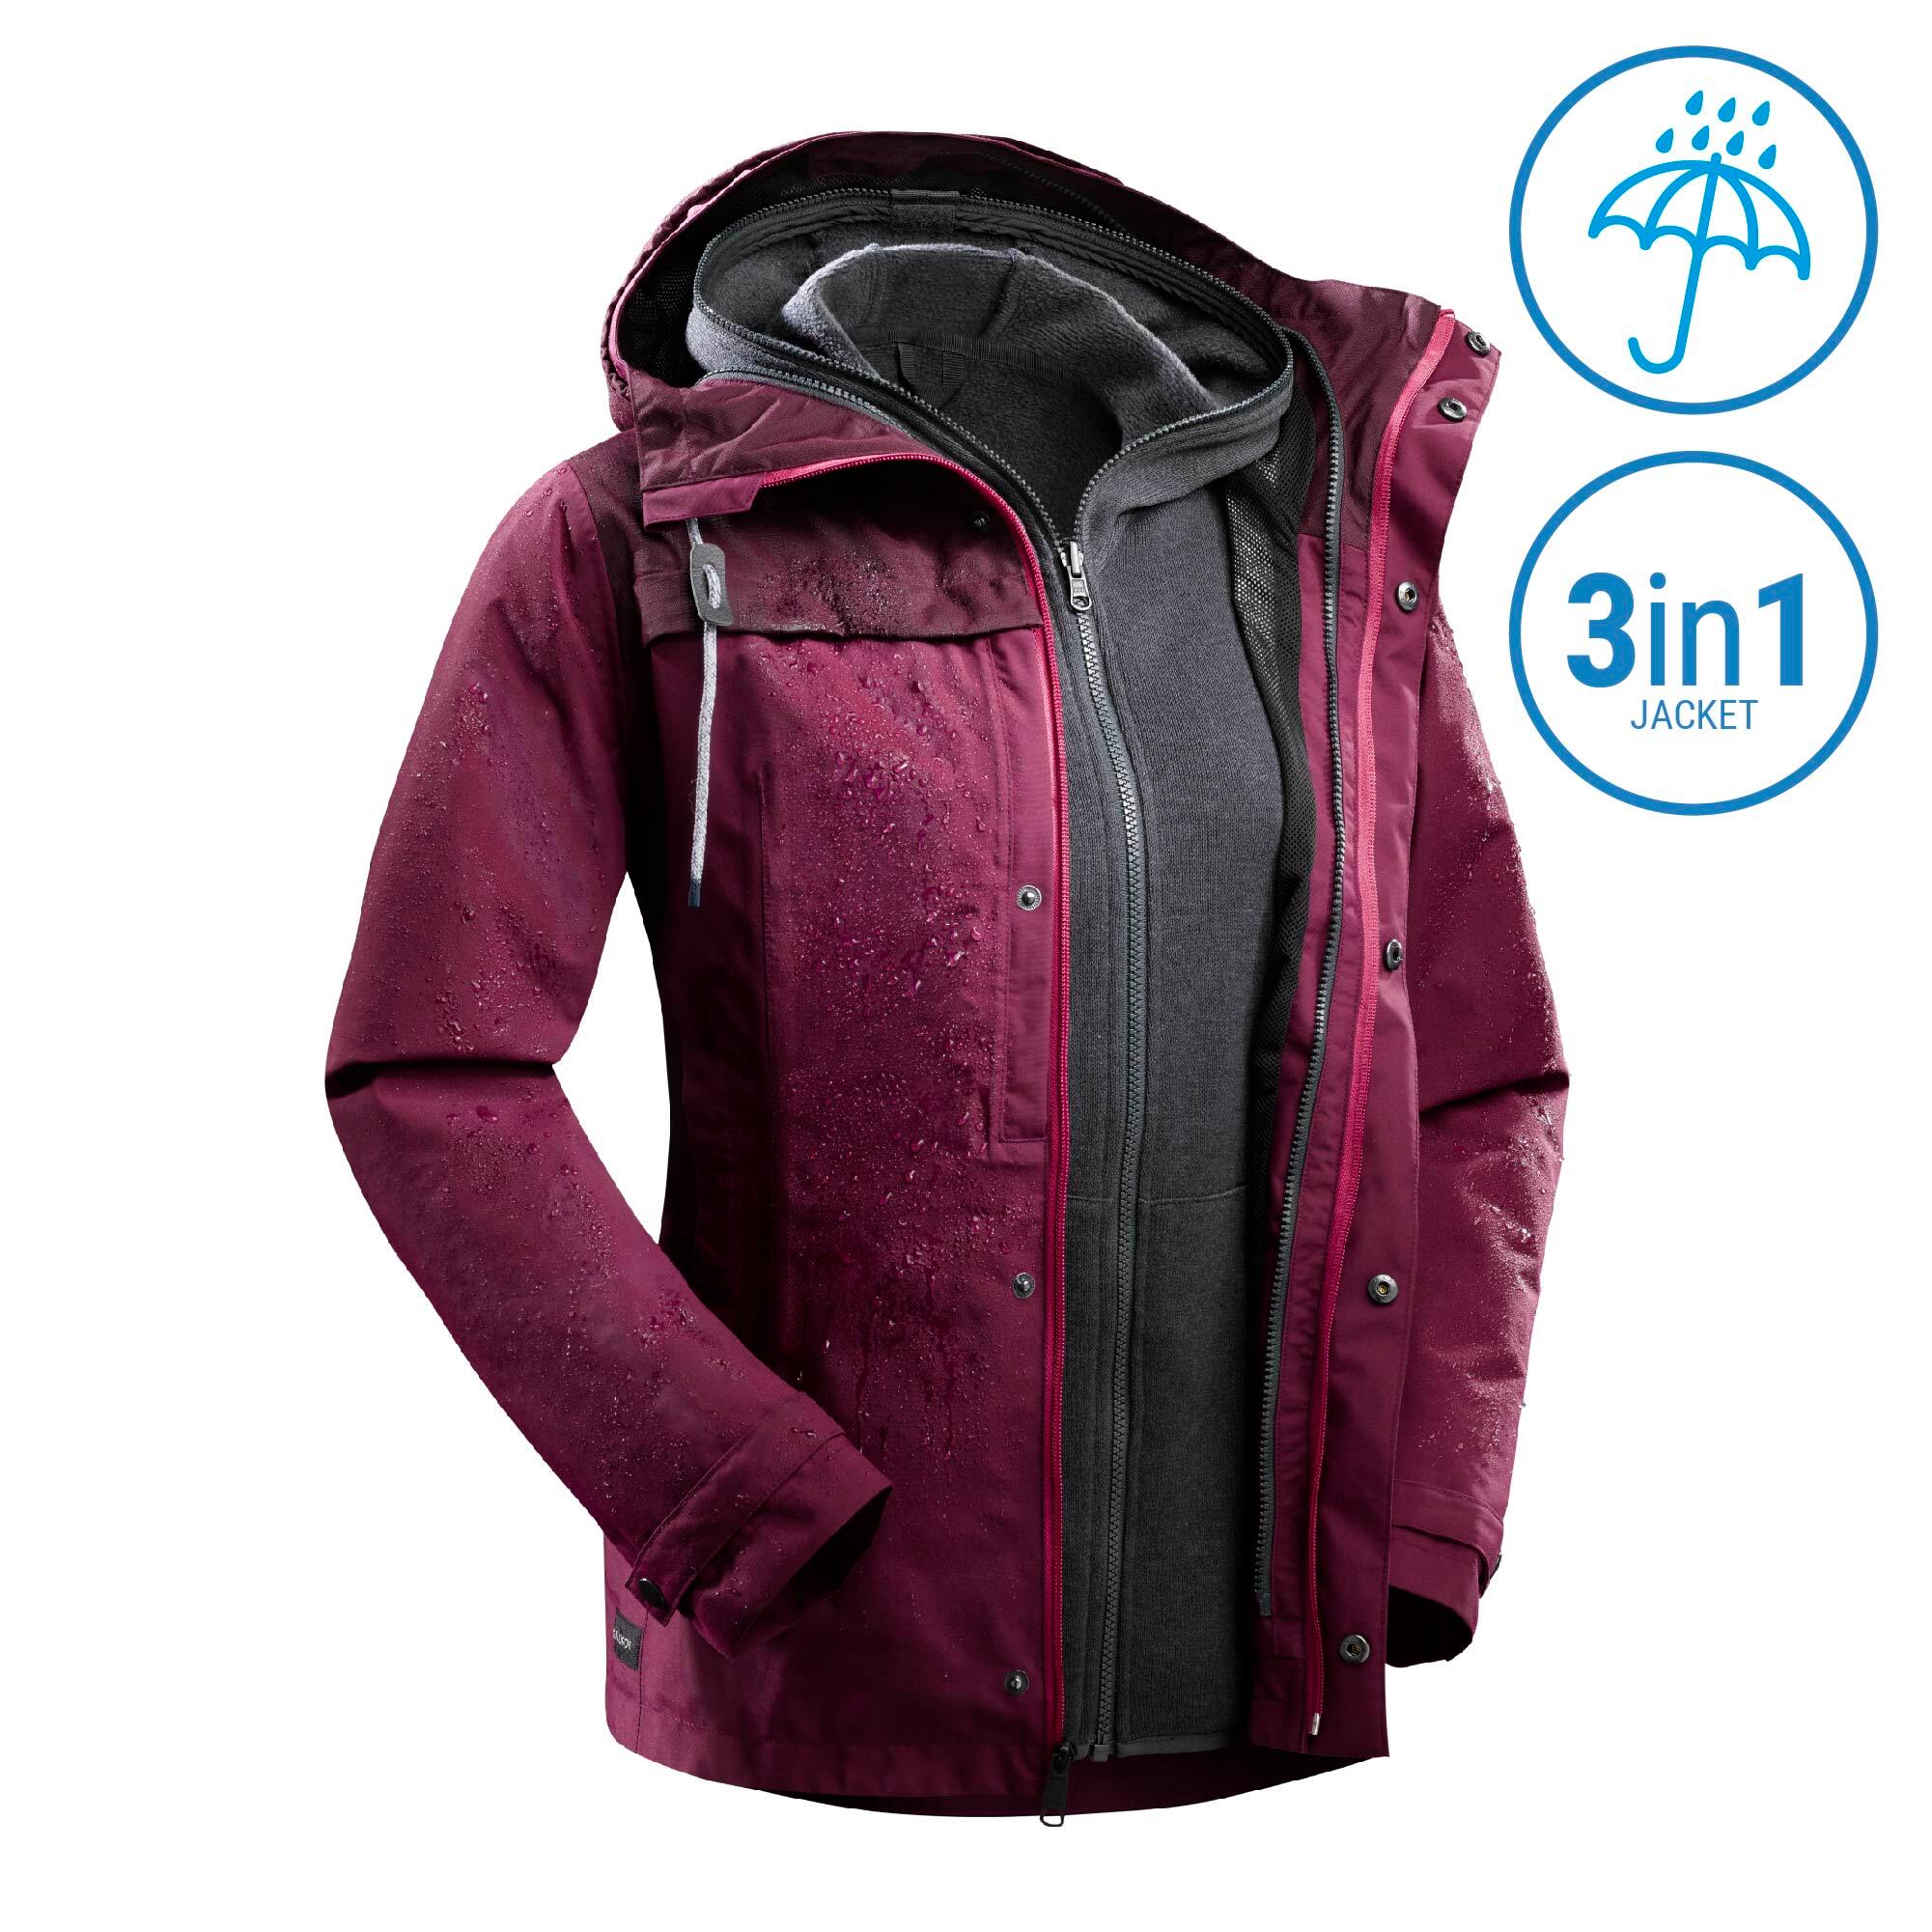 Decathlon Sports India - The MT100 padded jacket is light and compact ,  ideal for city chills and chilly hills! You can trek comfortably in cool  weather down to -5 degree C